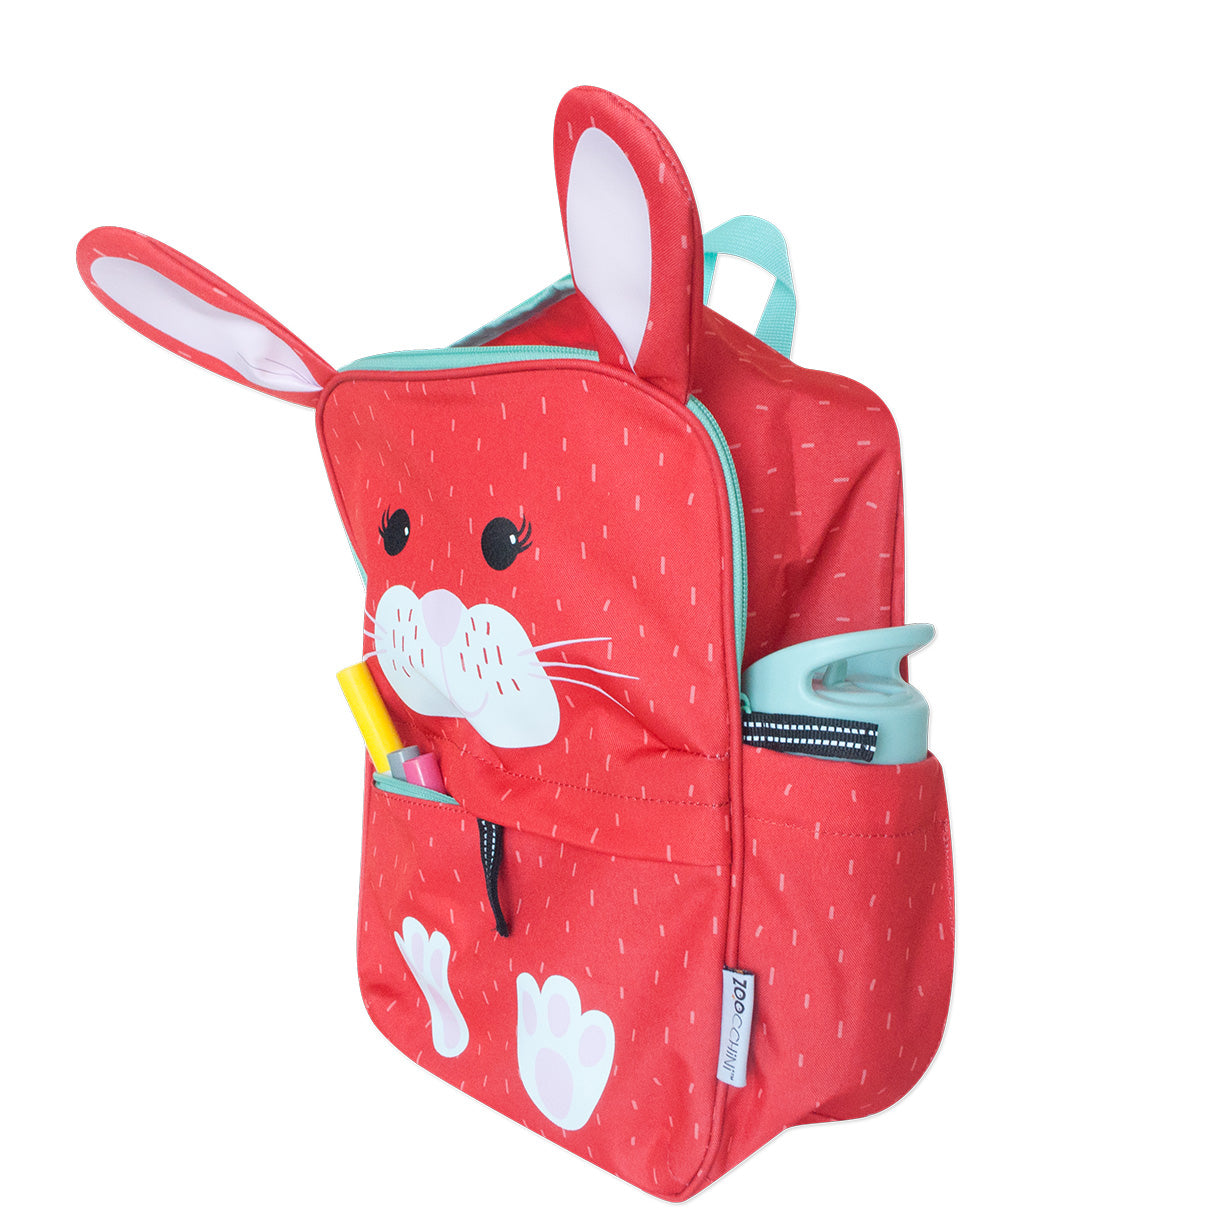 Bella - Everyday - the Backpack ZOOCCHINI Toddler/Kids Square Bunny